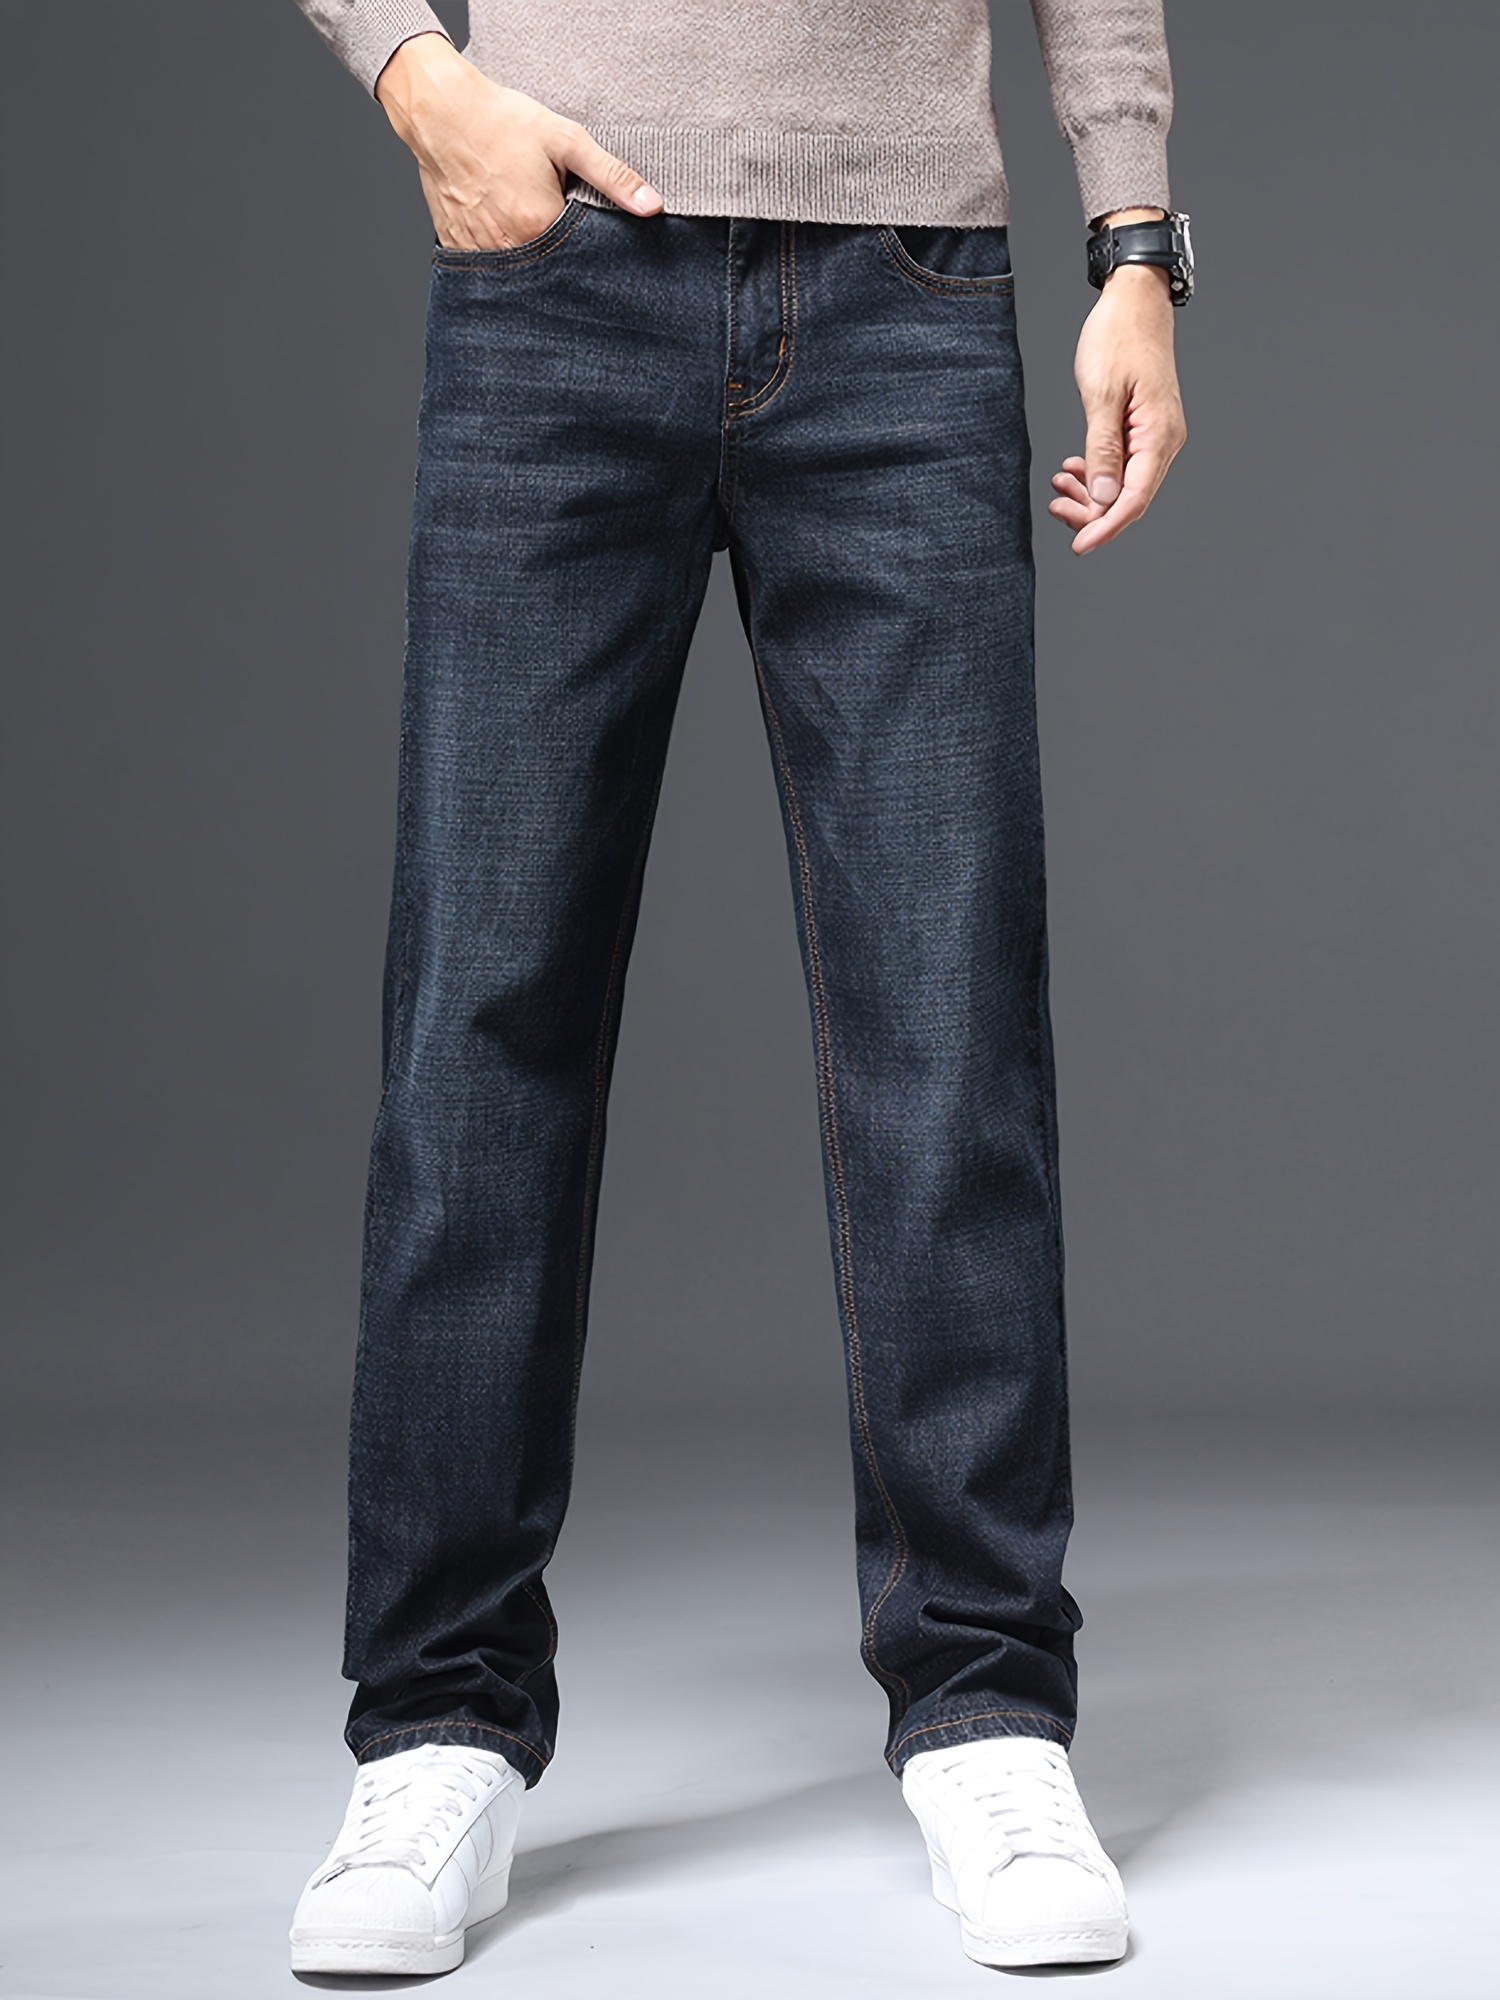 New Mens Business Slim Straight Pants Spring Casual Trousers